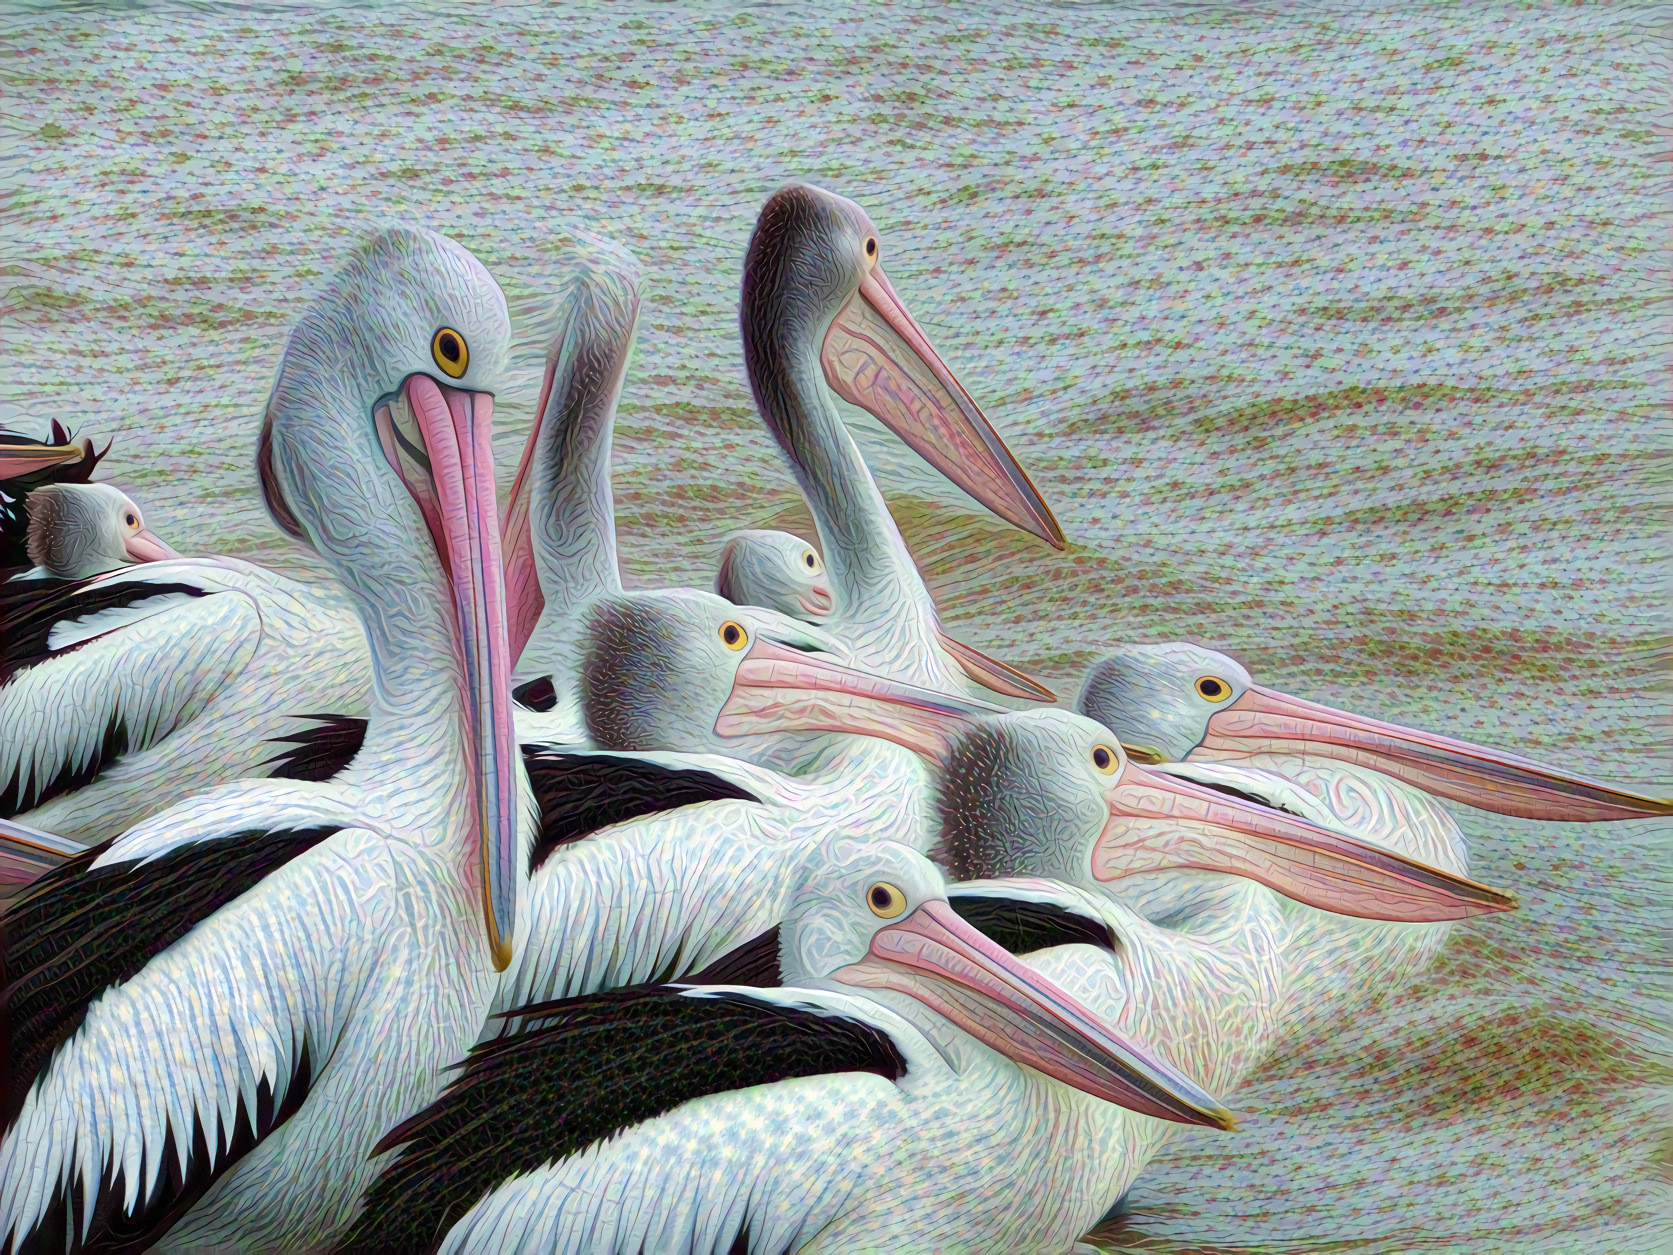 Pelicans Waiting for the Bus